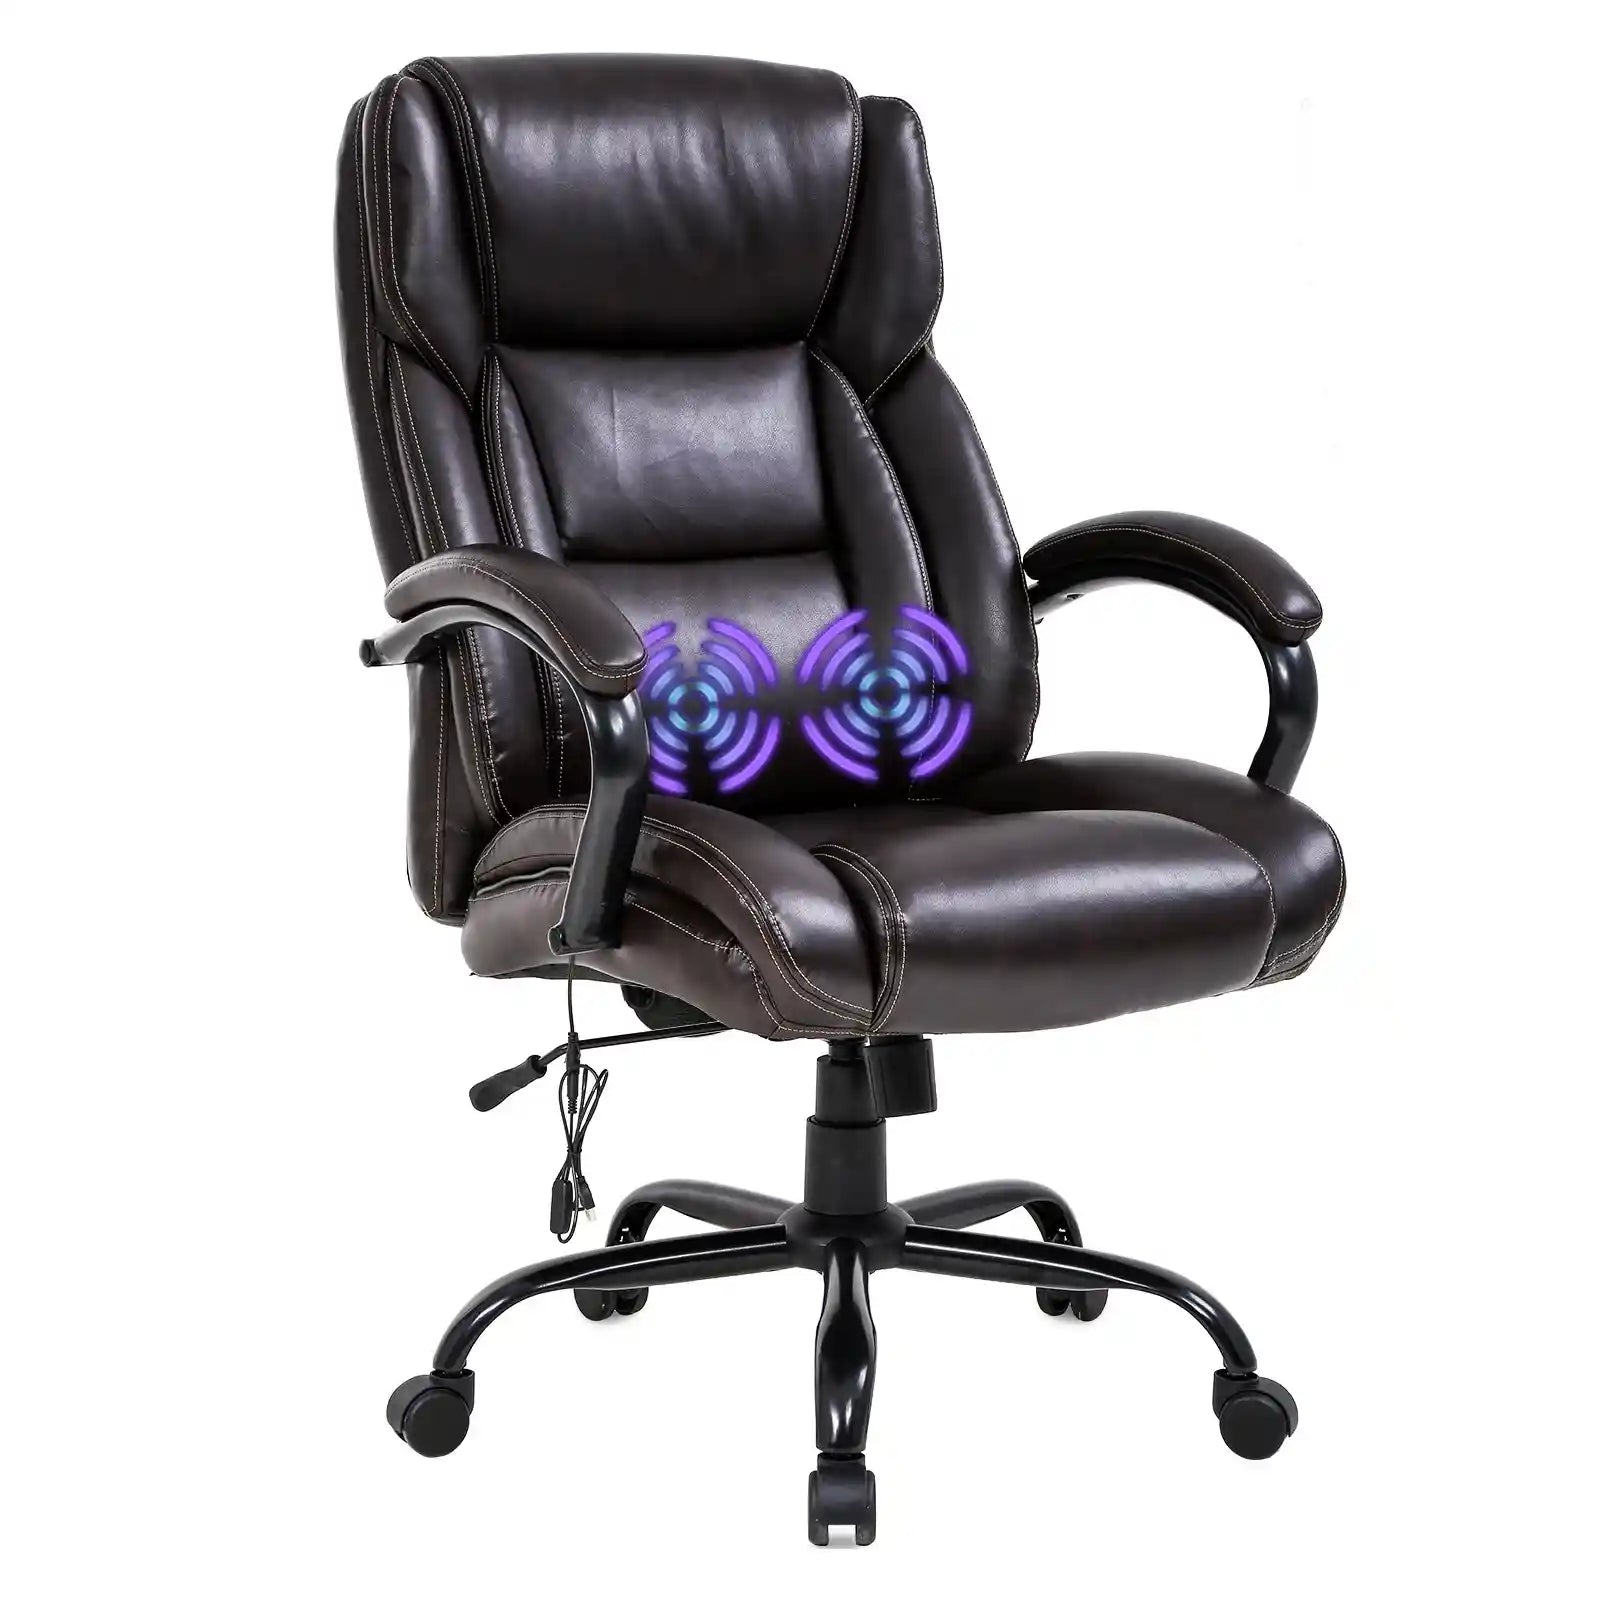 Executive Massage Chair with Lumbar Support